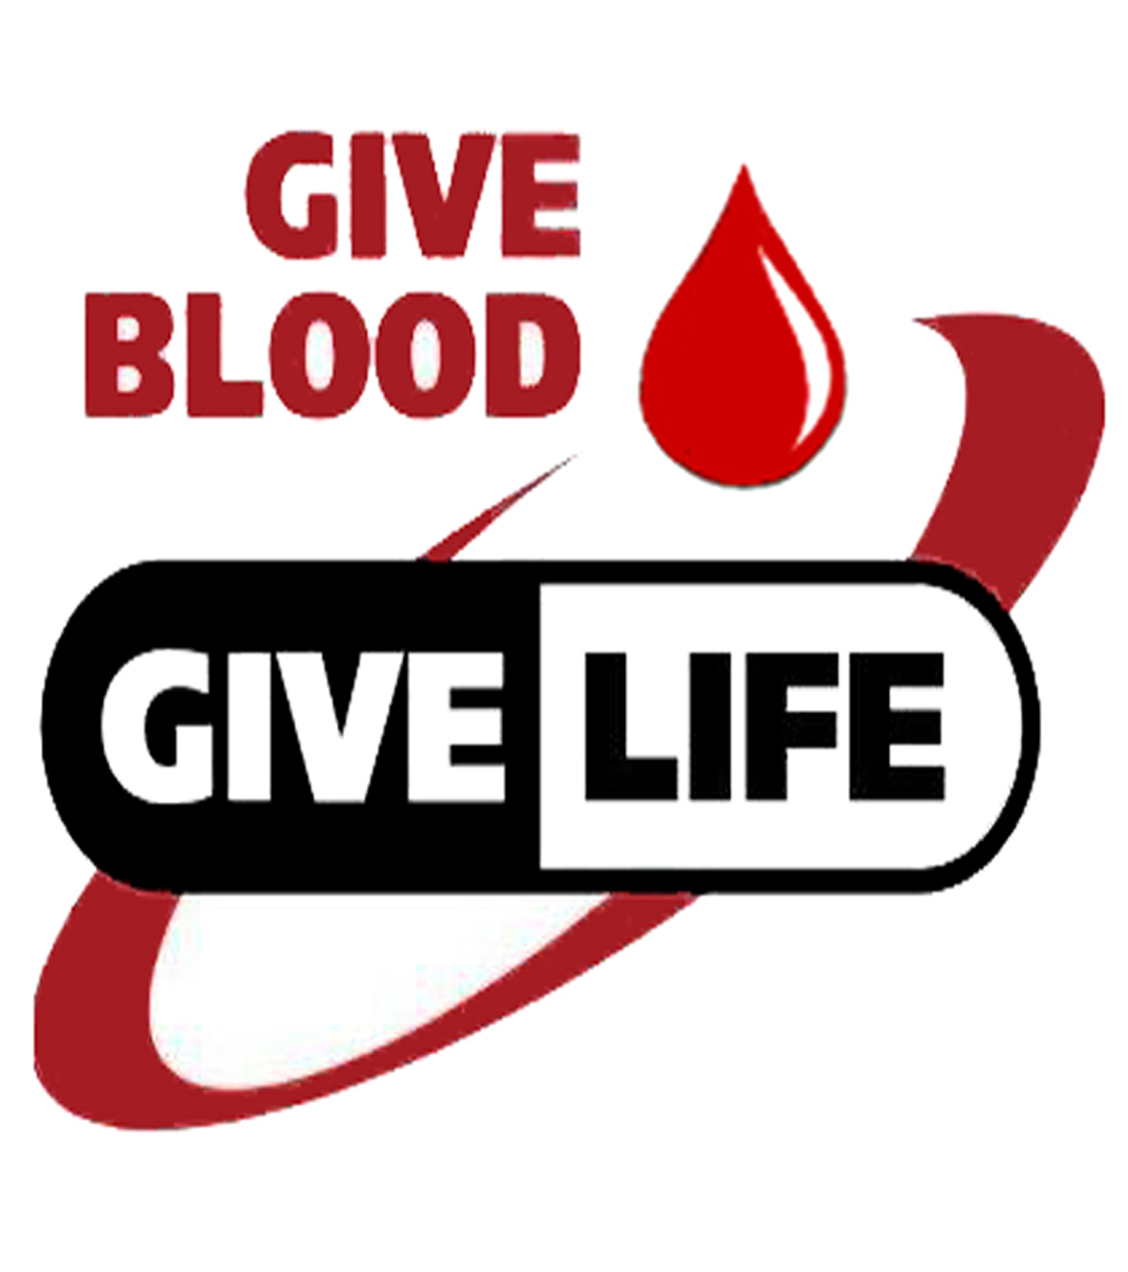 donate blood clipart free - photo #9